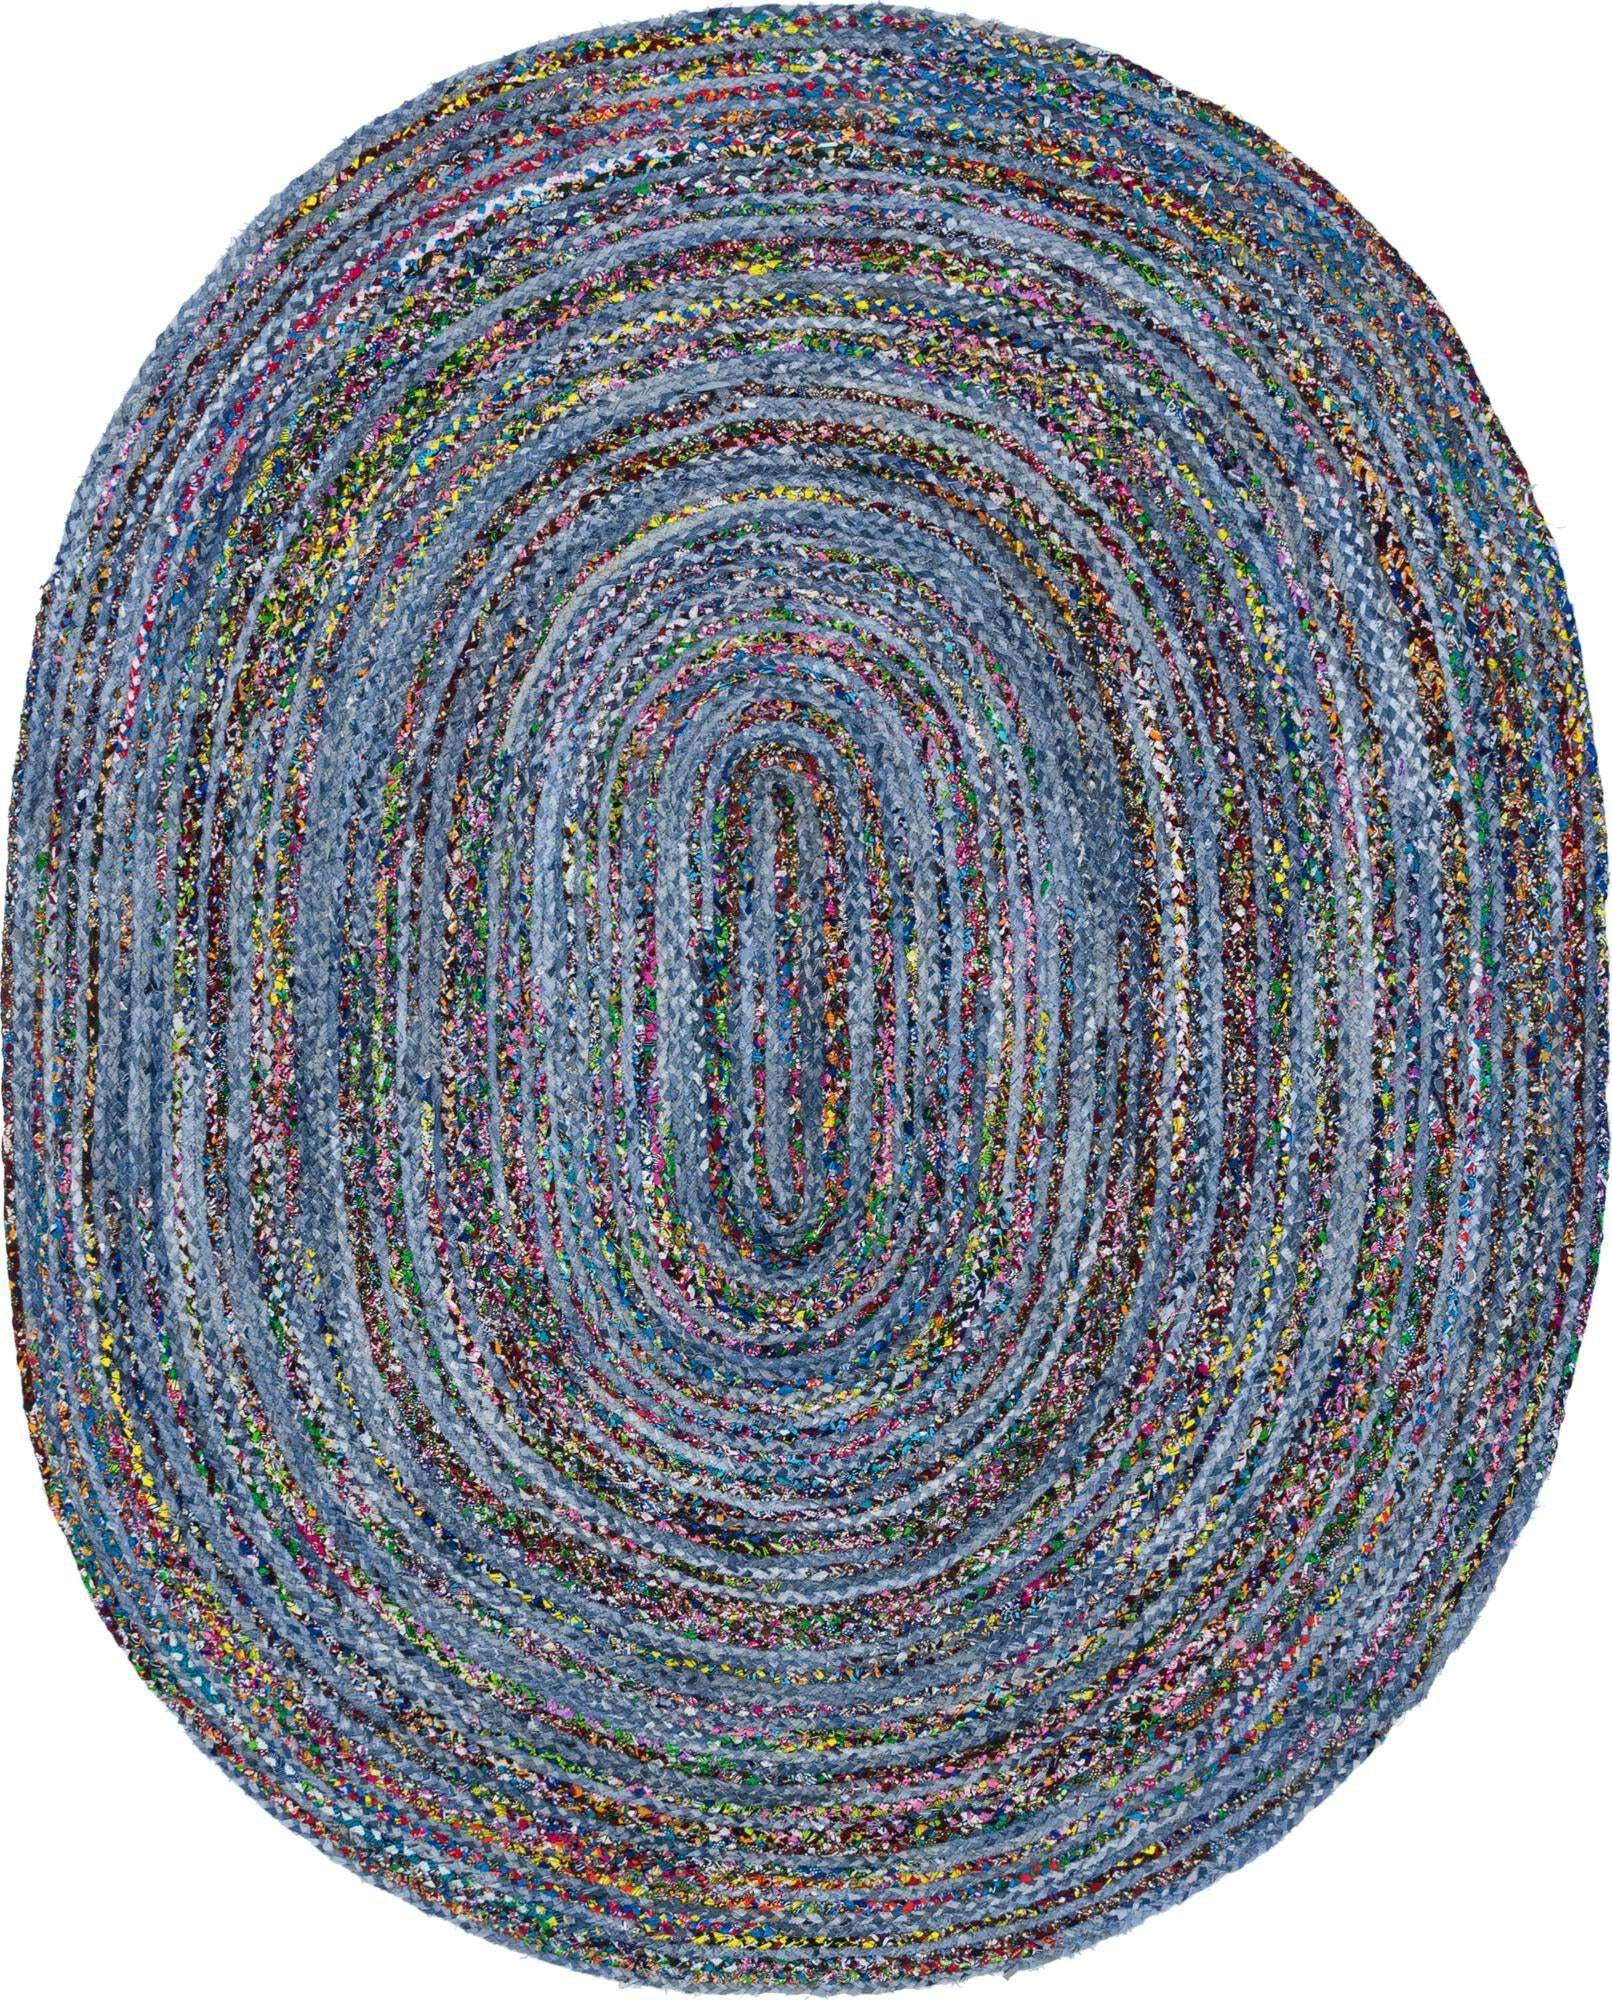 https://cdn.shopify.com/s/files/1/0458/7513/4624/files/braided-chindi-abstract-oval-8x10-oval-rug-blue-and-multi-unique-loom-casaone-1.jpg?v=1686650655&width=1612